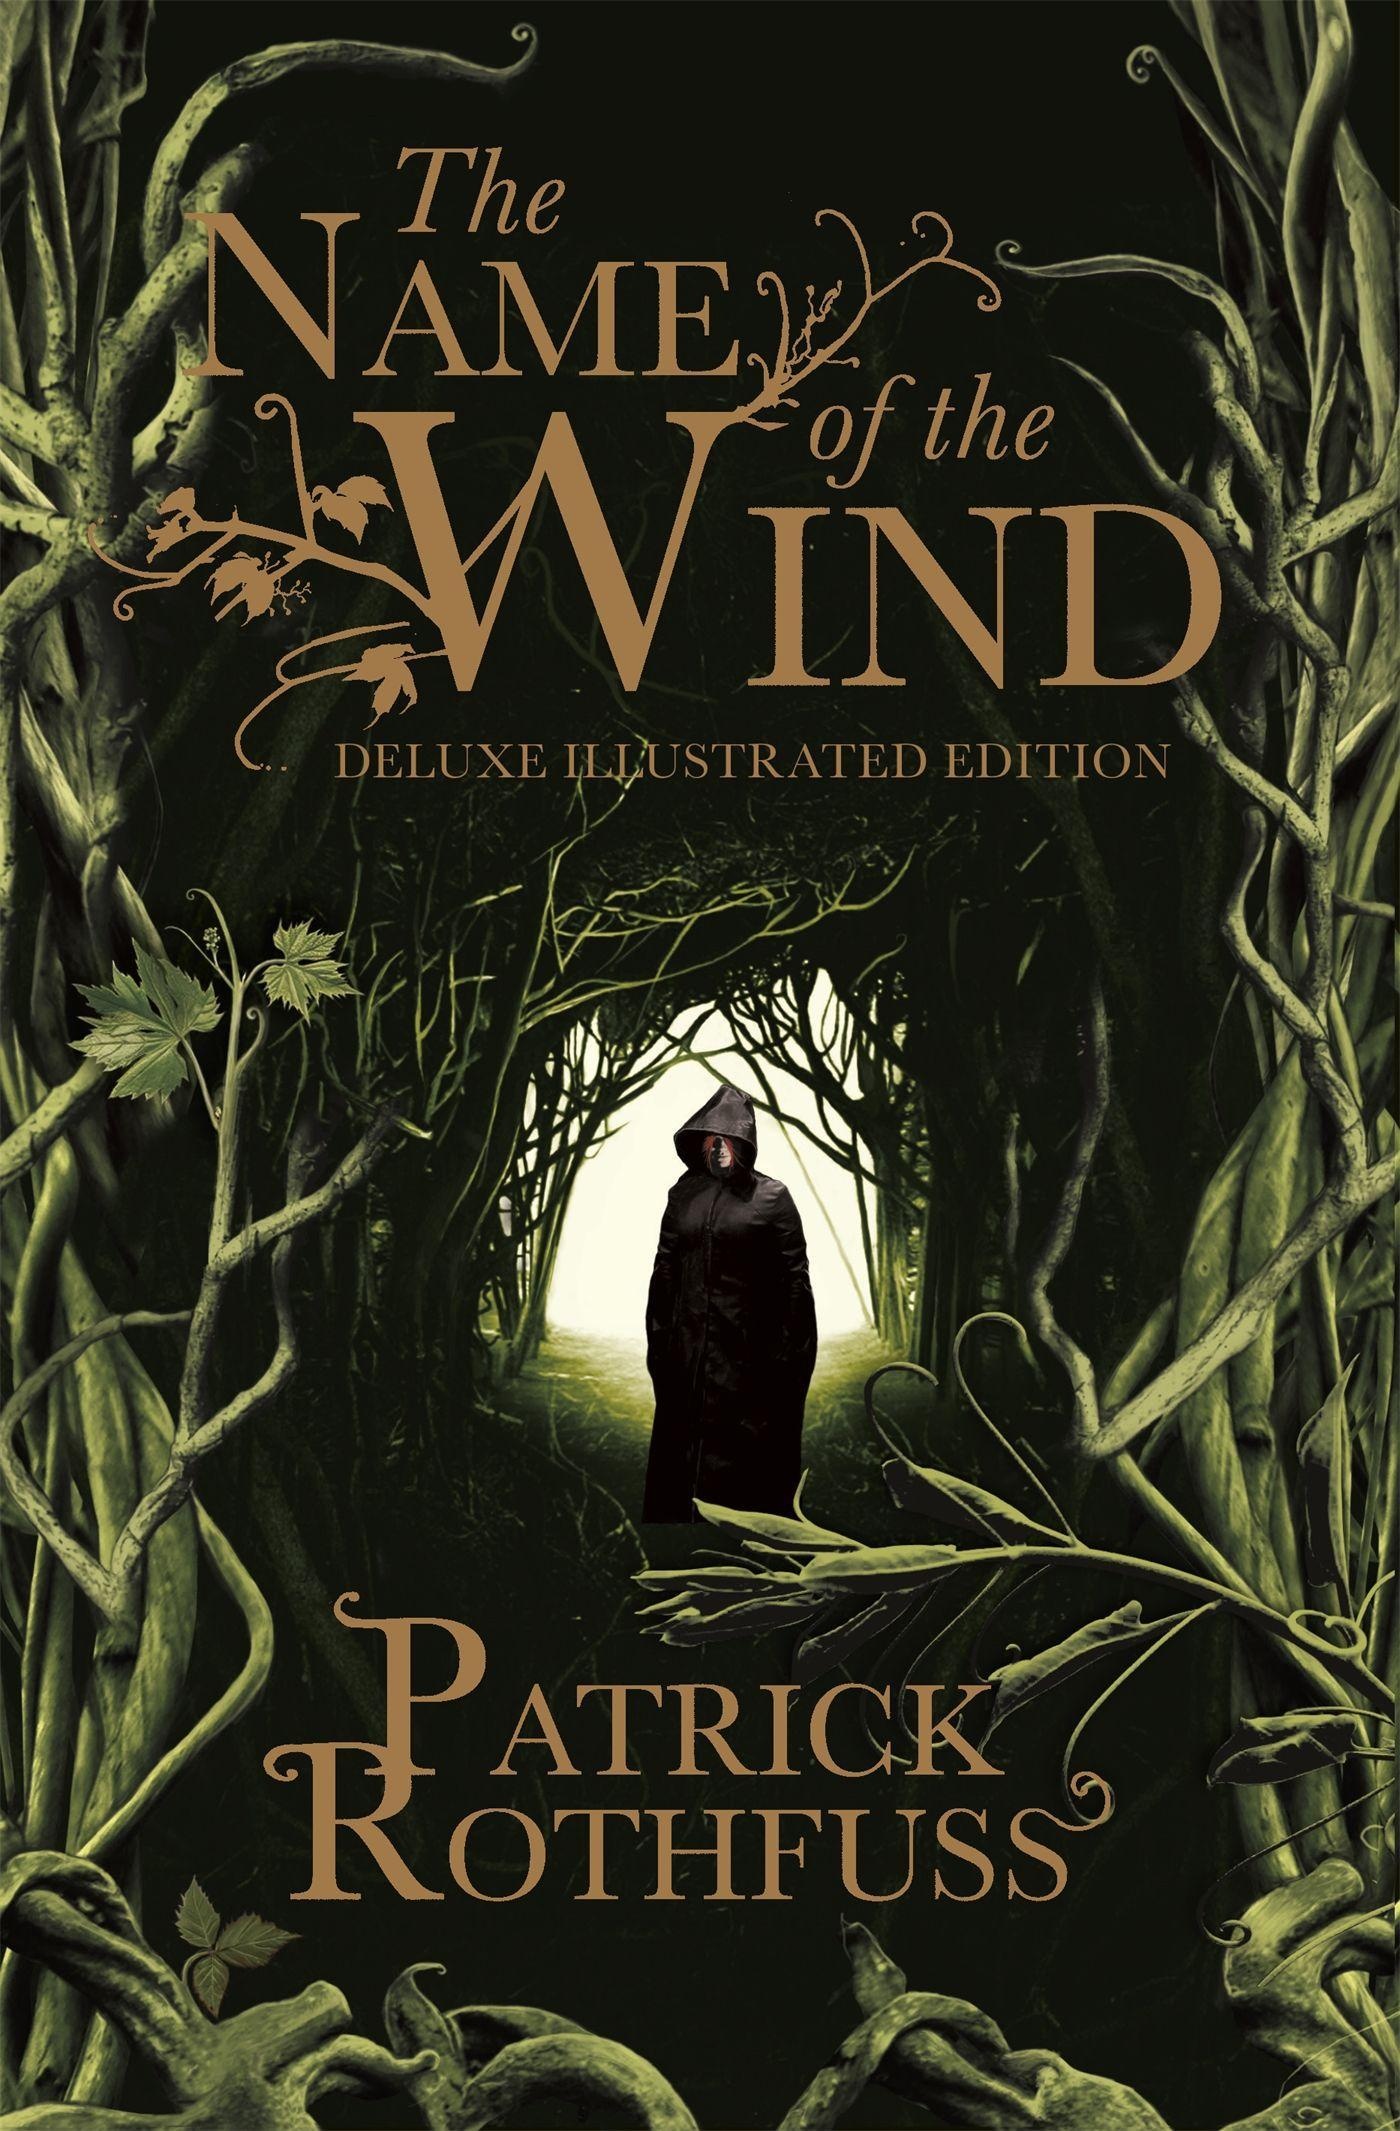 The Name of the Wind. 10th Anniversary Deluxe Illustrated Edition, Belletristik von Patrick Rothfuss